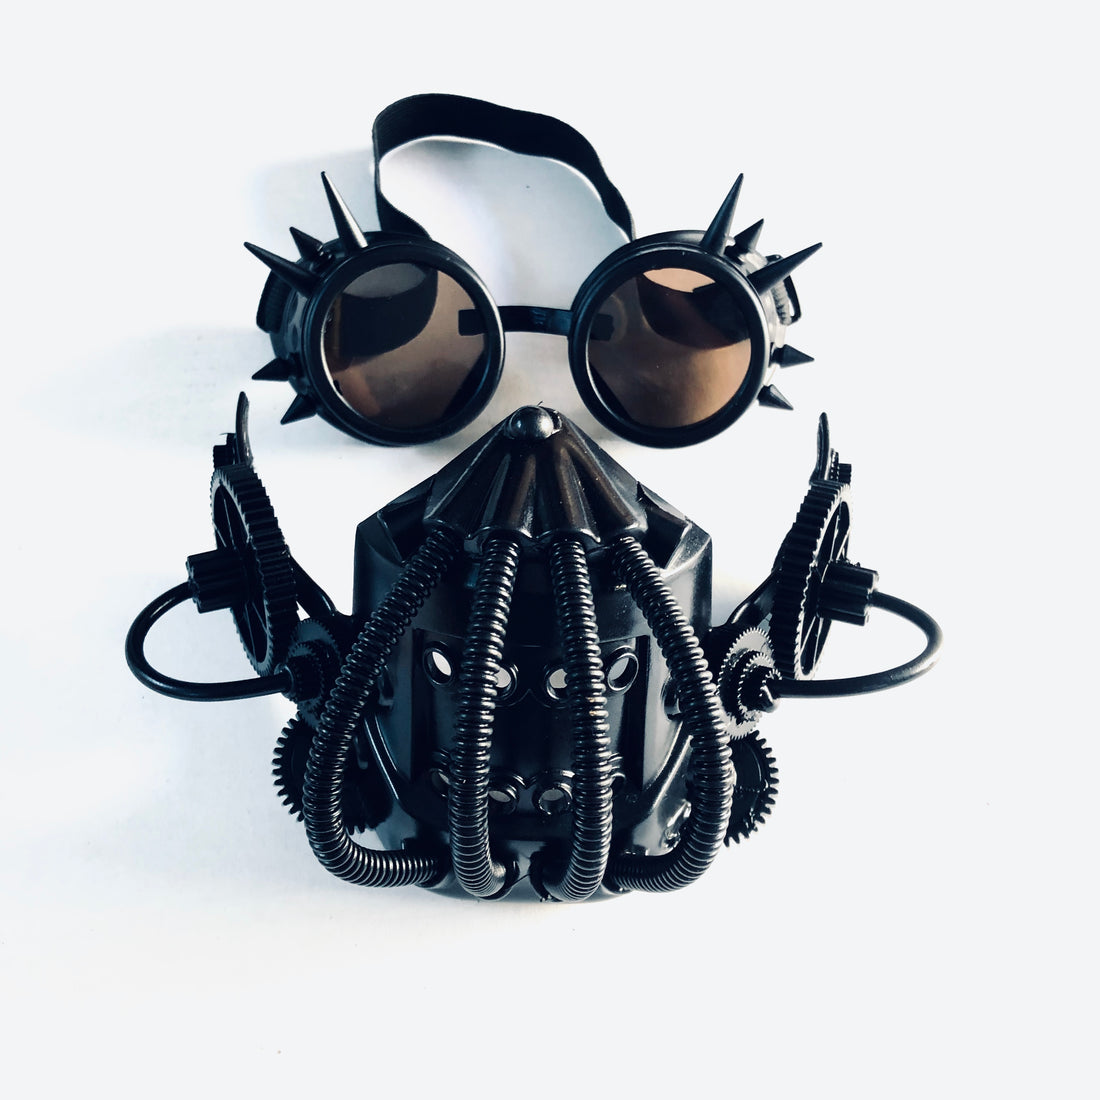 Cosplay Gas Mask Spiked Goggles - Black